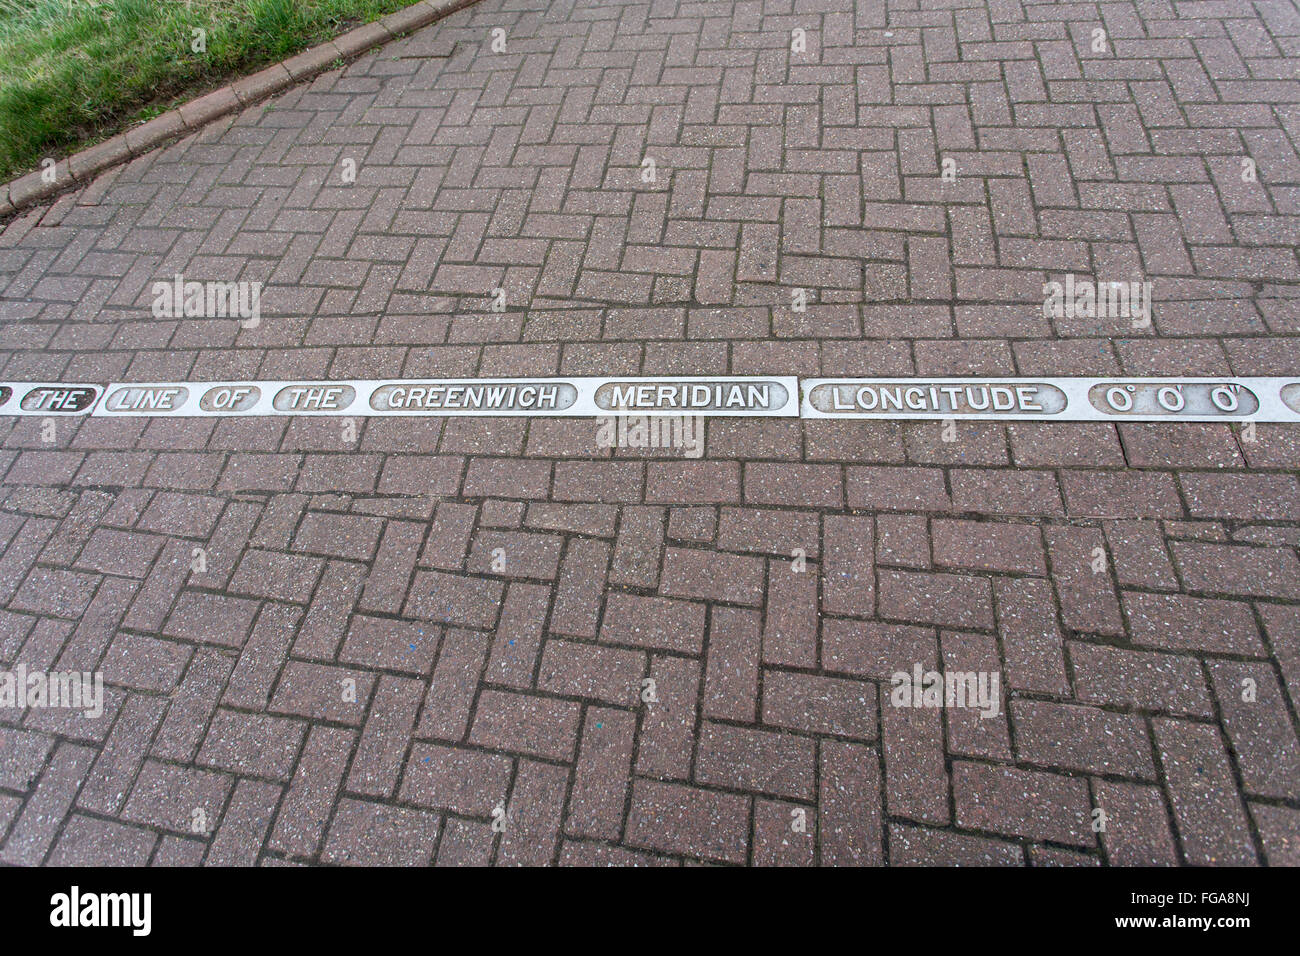 Greenwich Meridian Line at Cleethorpes UK. The stainless steel metal line was made by Hadcliffes of Sheffield in the 1930's Stock Photo